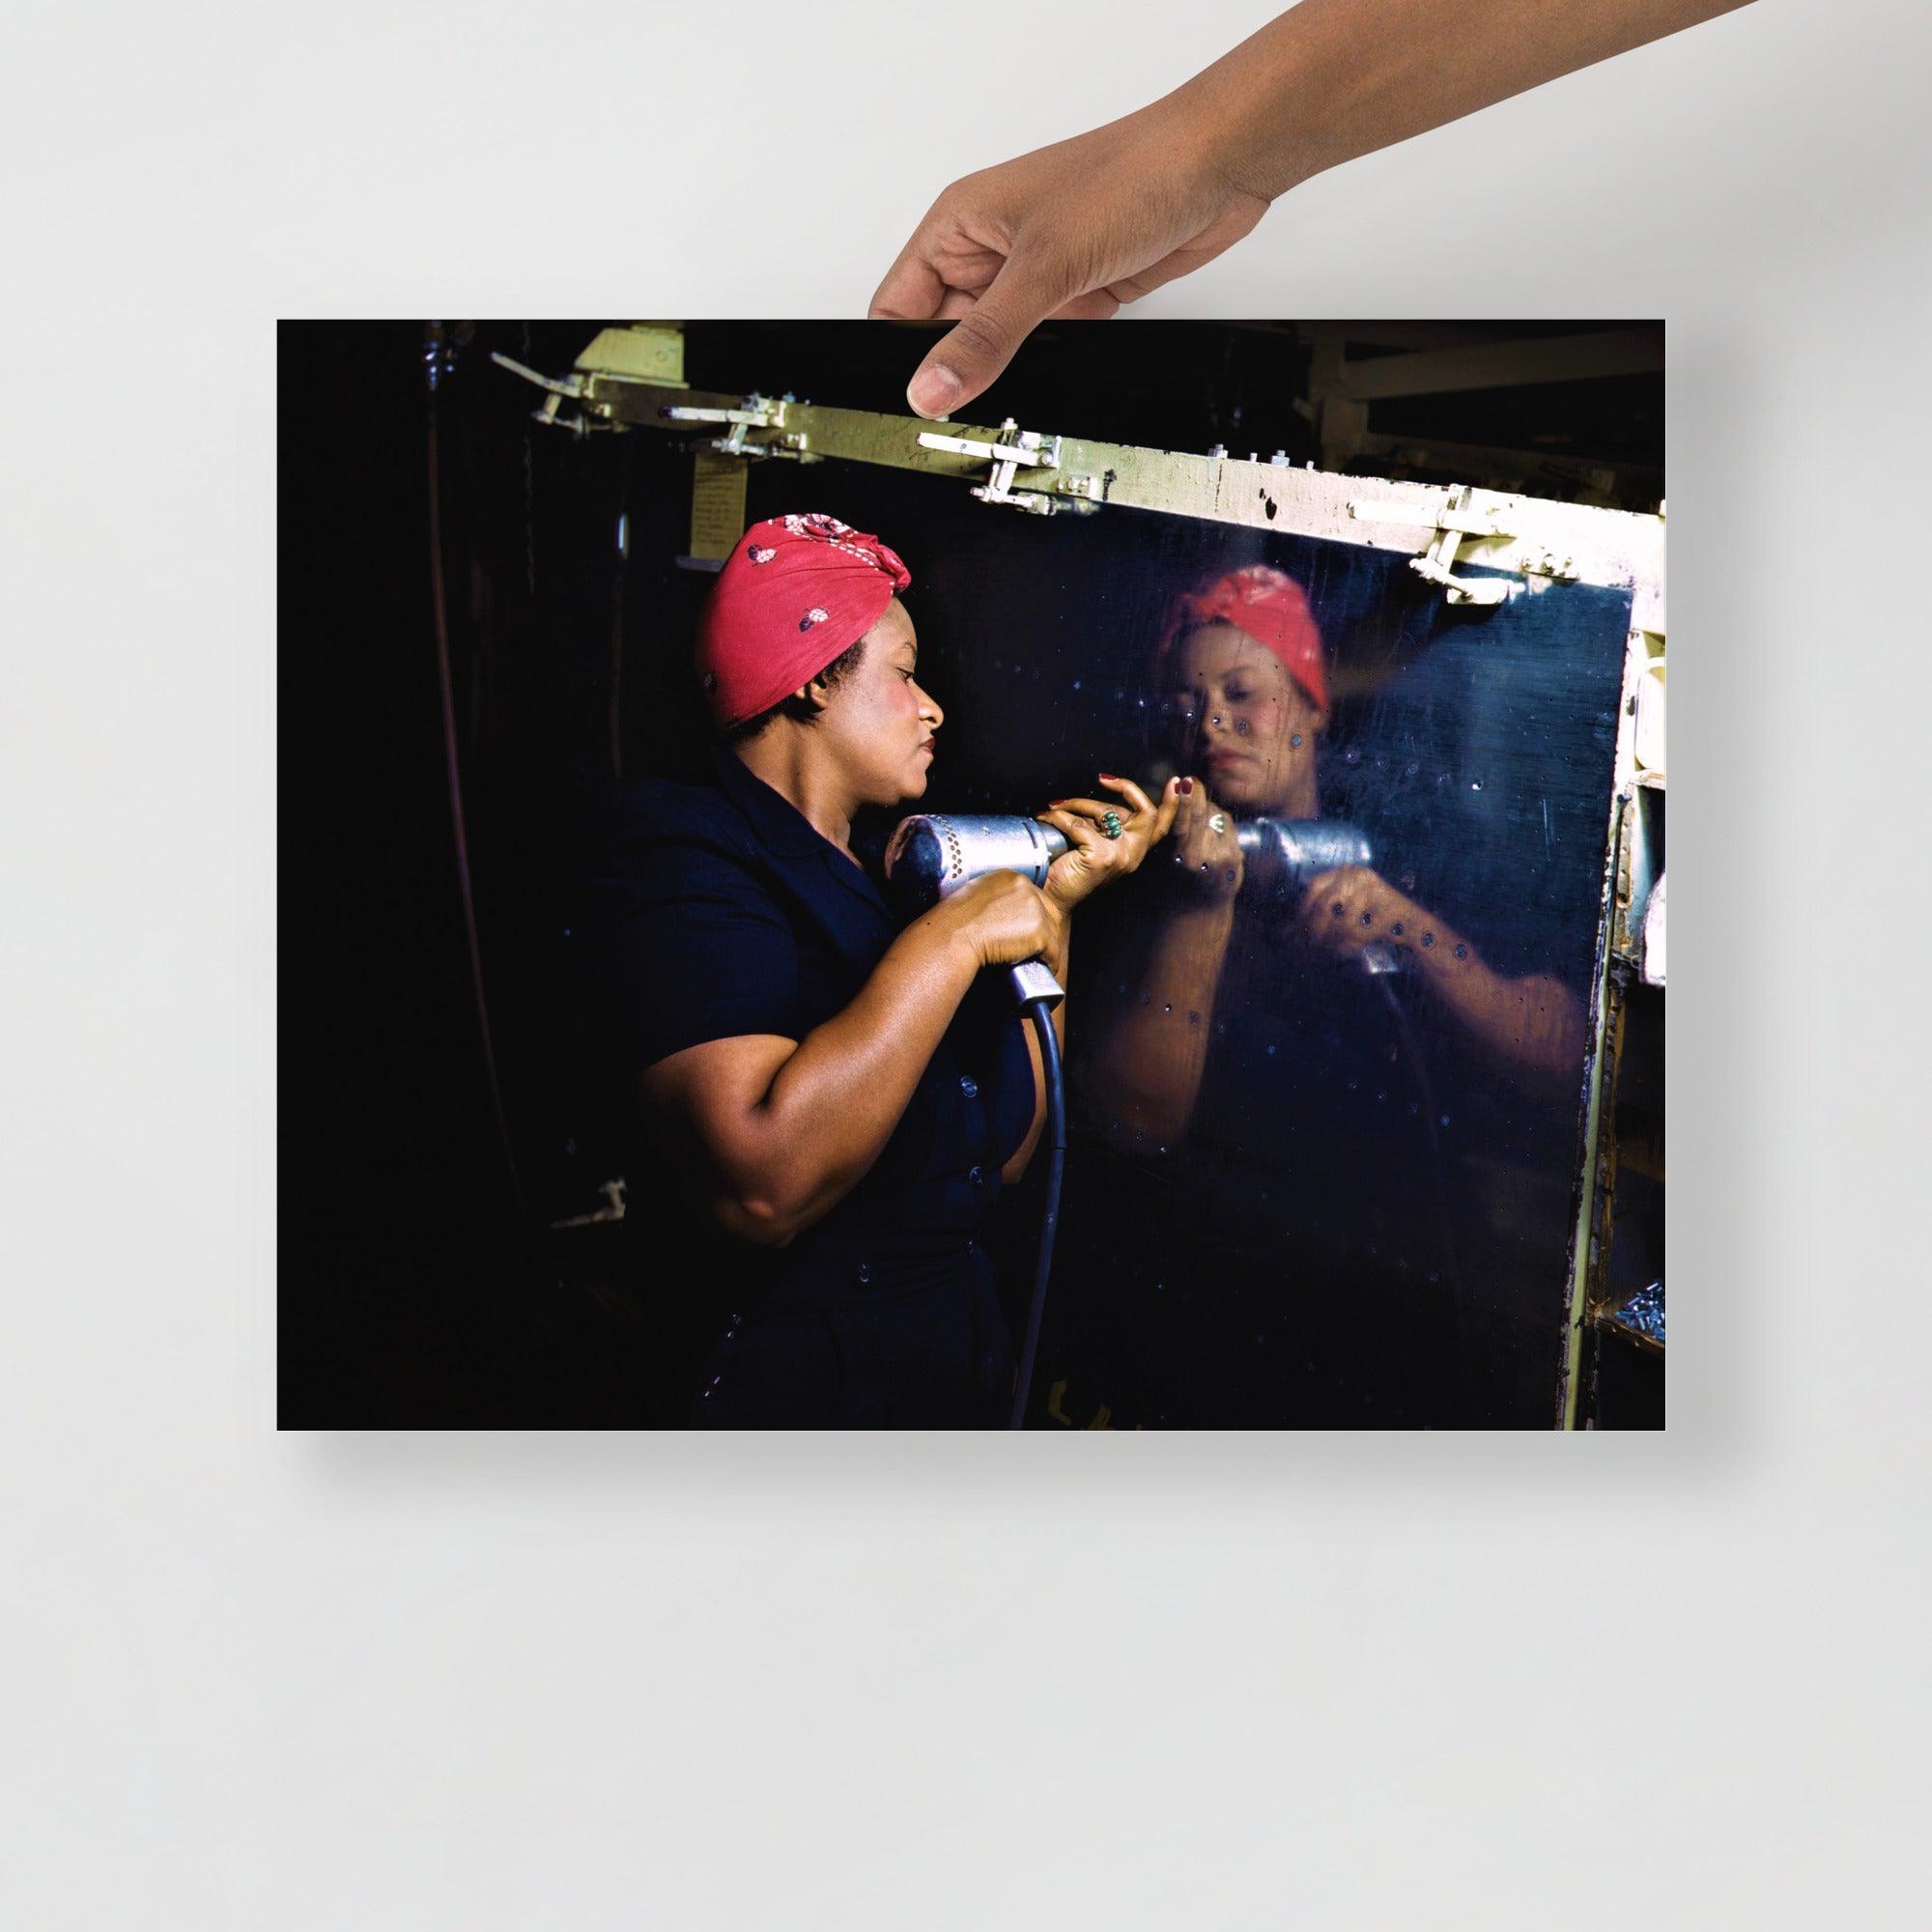 A Rosie the Riveter poster on a plain backdrop in size 16x20”.